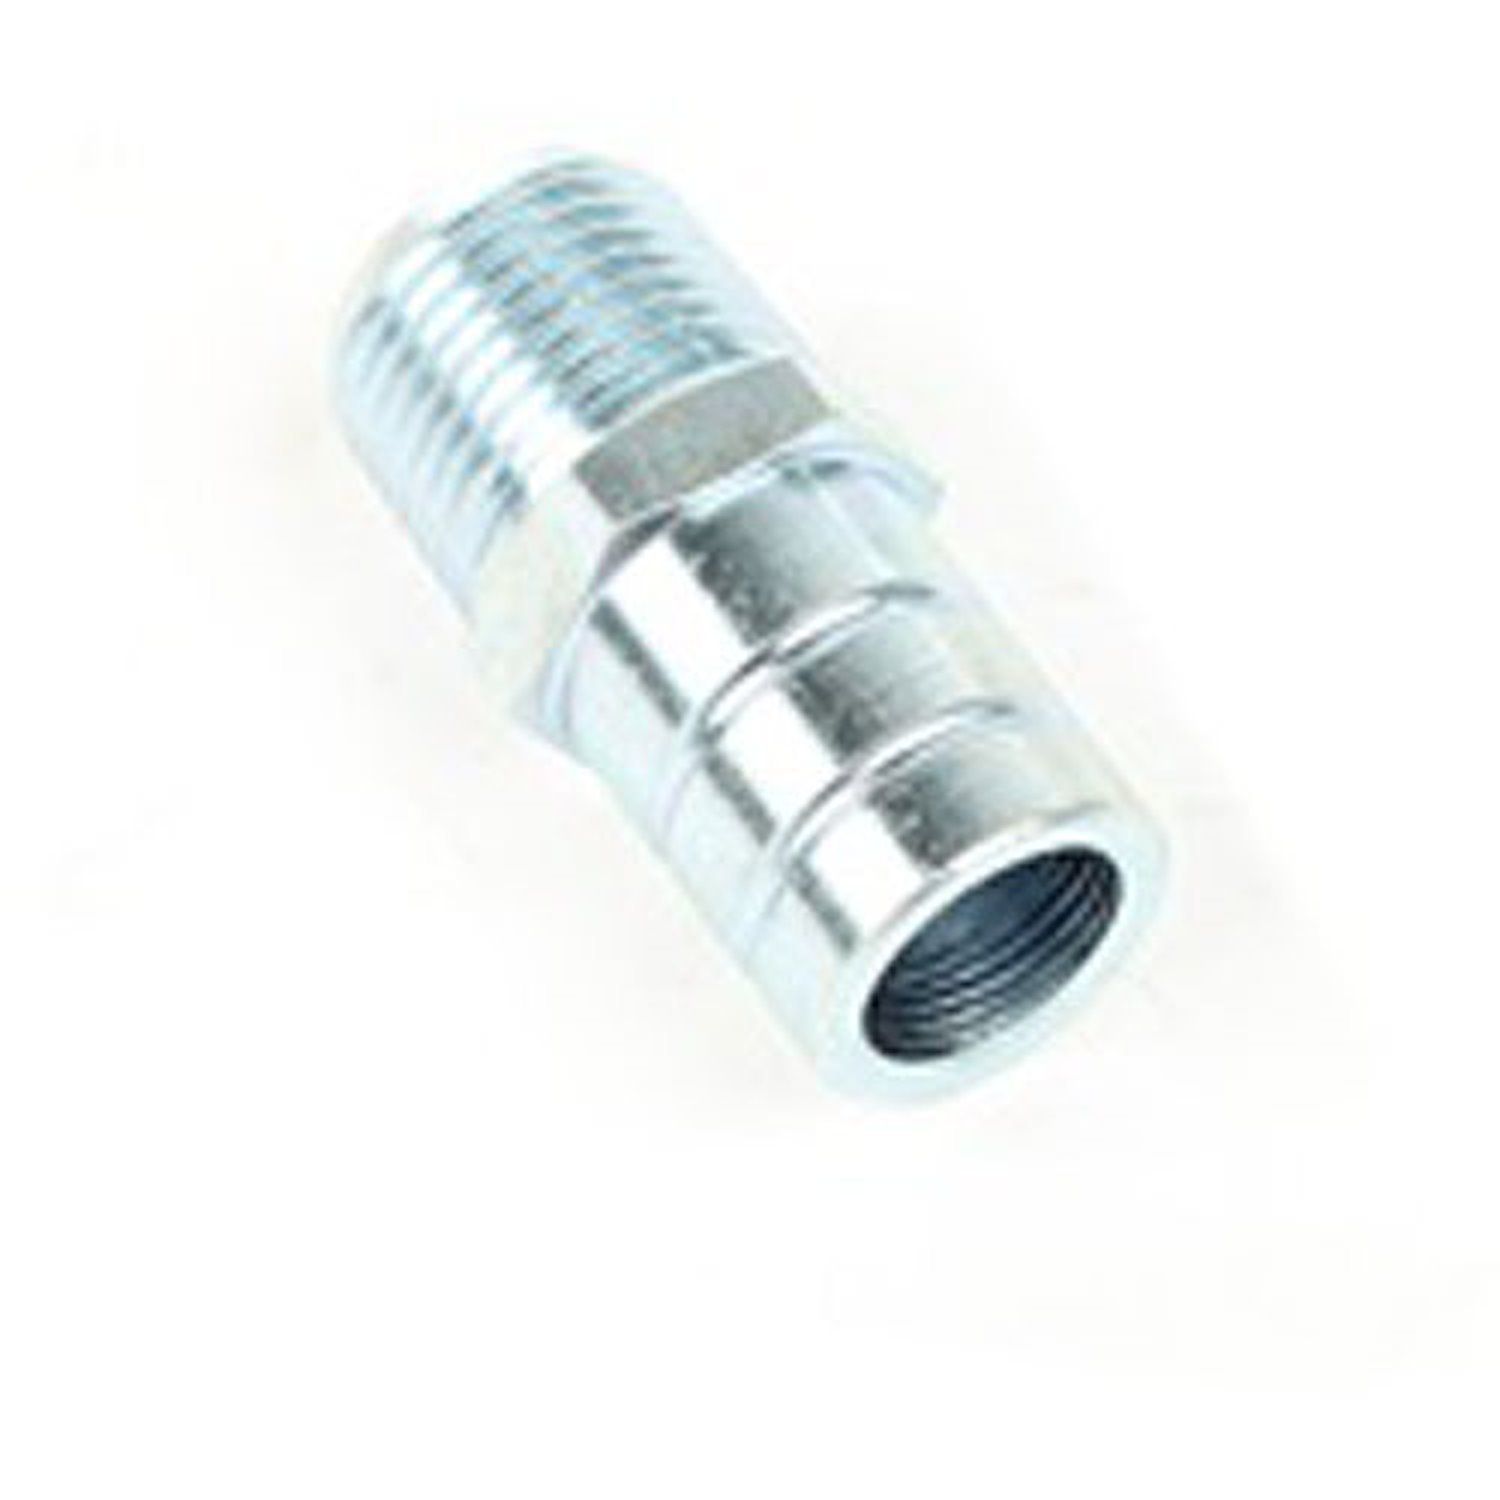 This heater hose fitting screws into the head or the water pump to allow a heater hose to attach to